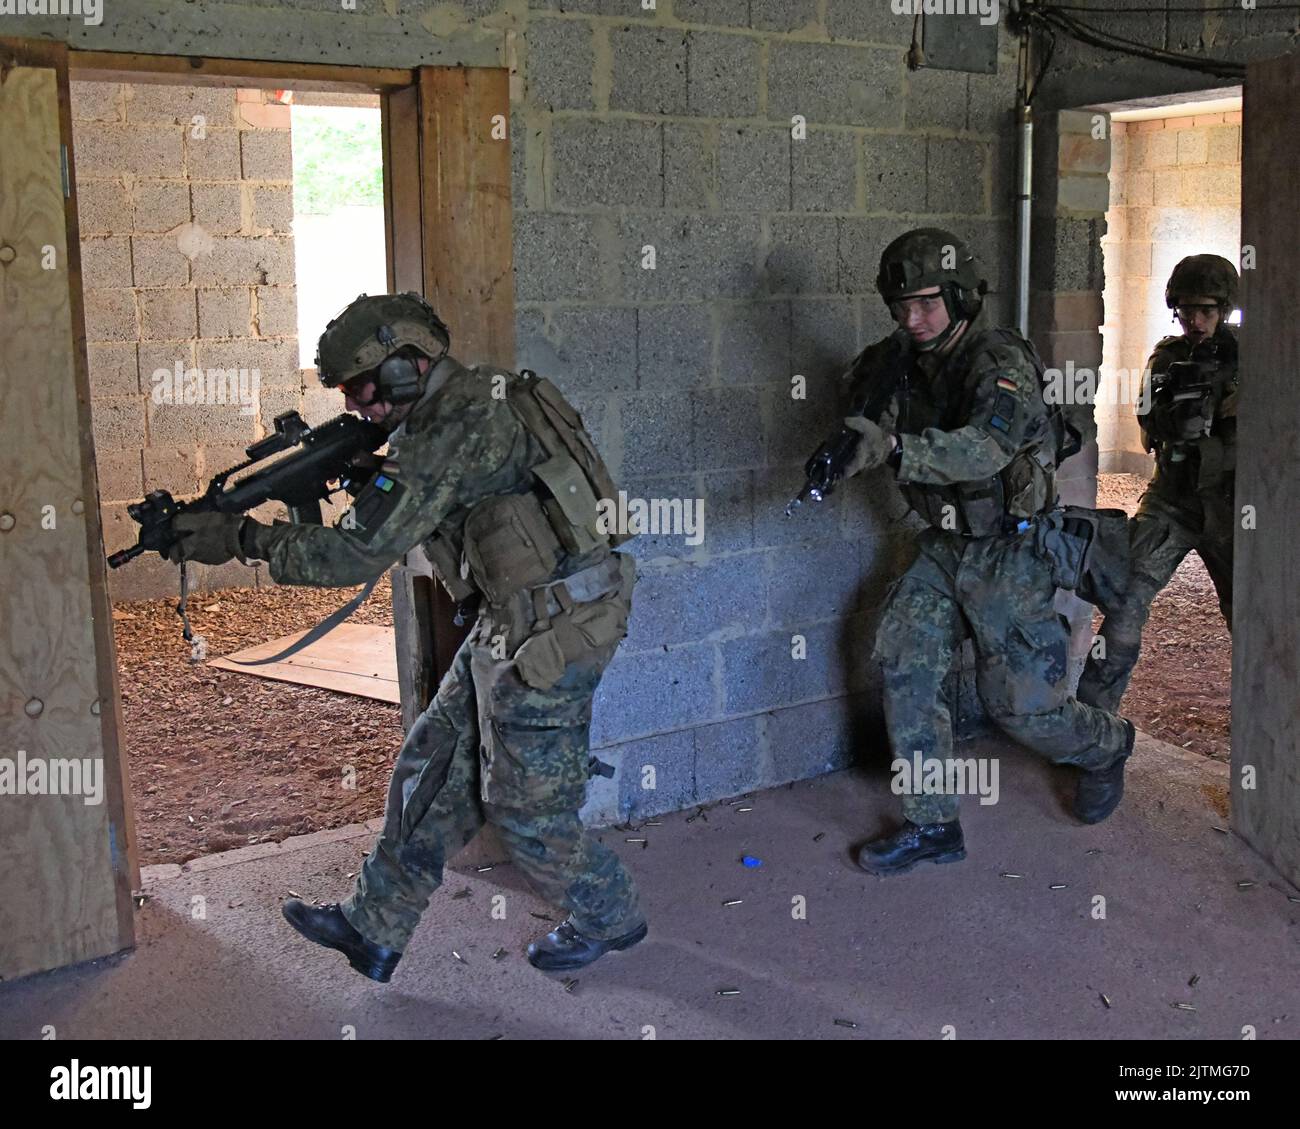 German Paratroopers (Bundeswehr) with the 4. Kompanie/Fallschirmjaeger, Regiment 26, clear a room during an urban terrain warfare exercise in Smith Barrack at Baumholder, Germany, Aug. 24, 2022. The unit trained in preparation for future Movement Over Urban Terrain Village exercises and scenarios. (U.S. Army Photo by Ruediger Hess) Stock Photo